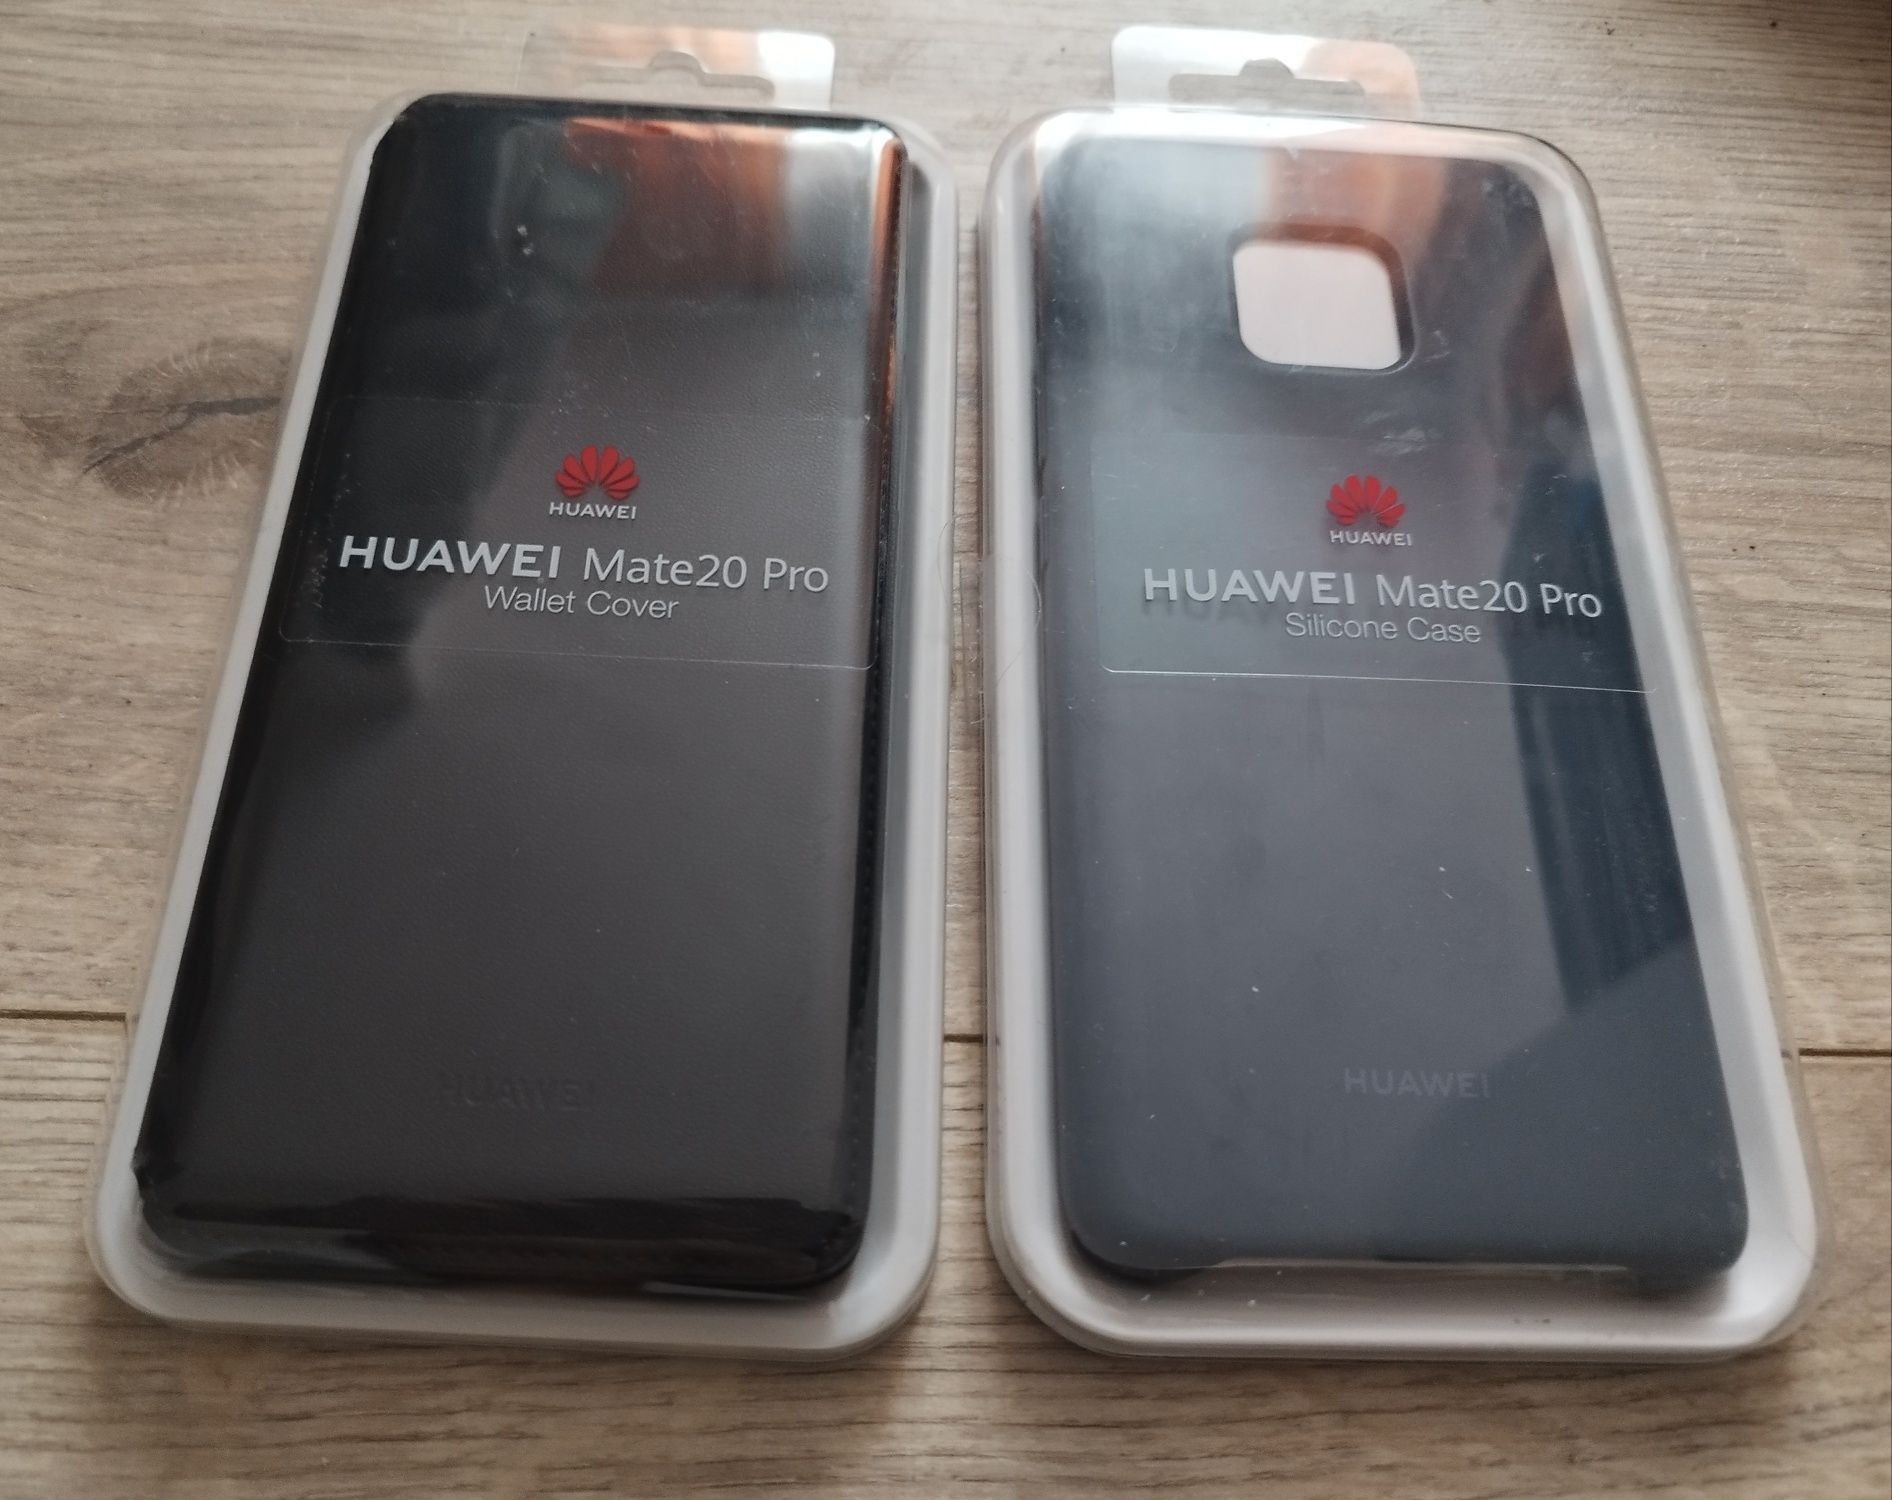 Huawei Mate 20 pro + Extras